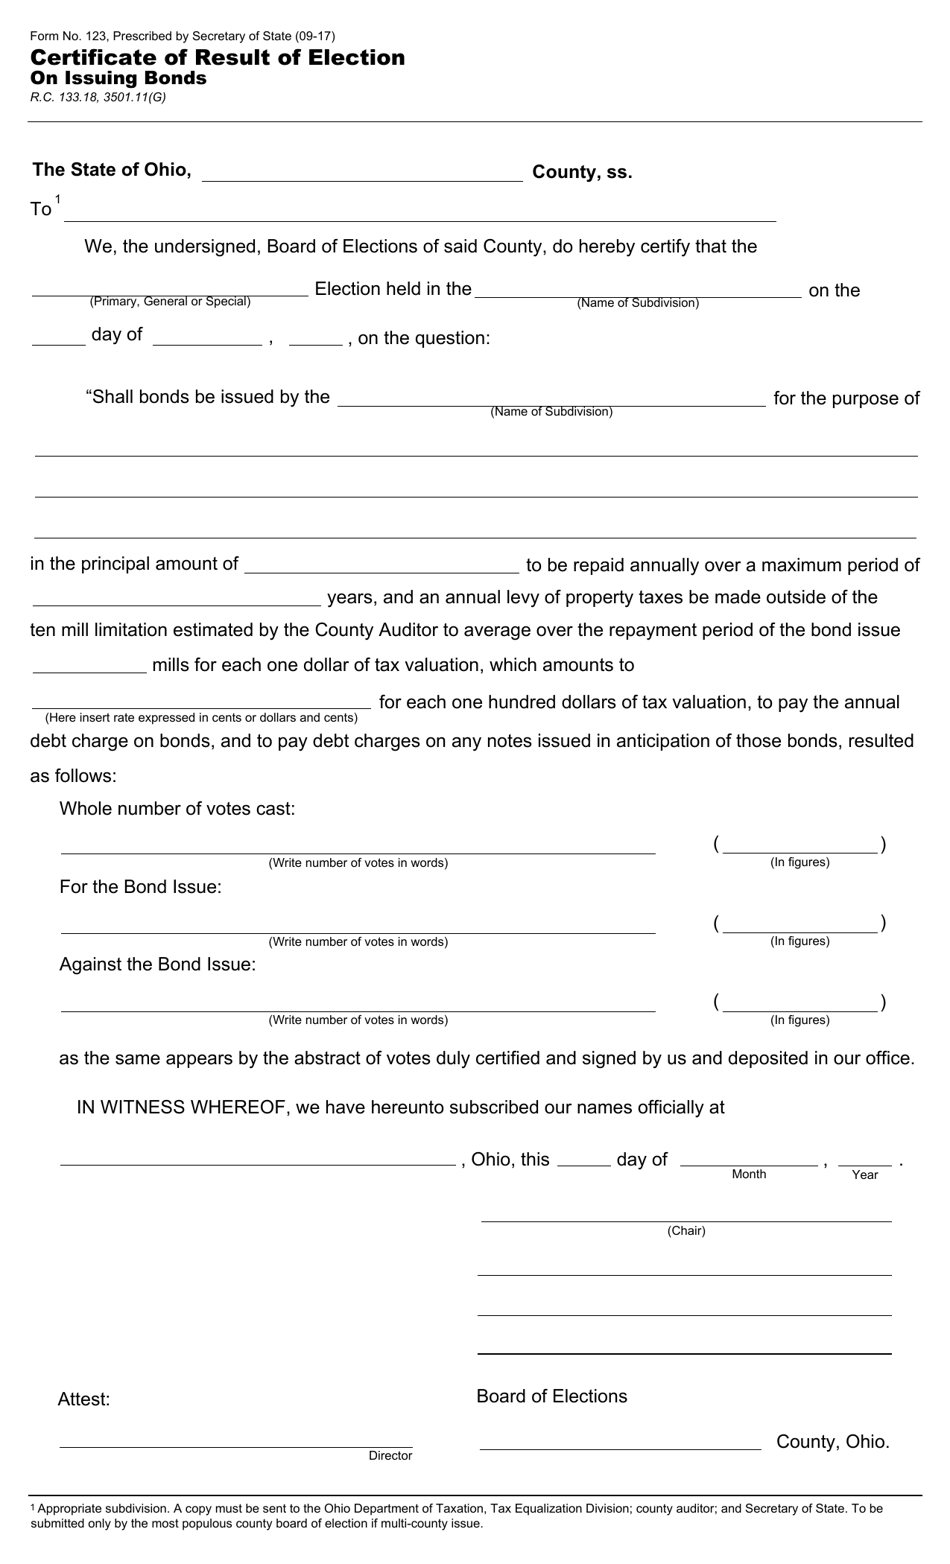 Form 123 Certificate of Result of Election on Issuing Bonds - Ohio, Page 1